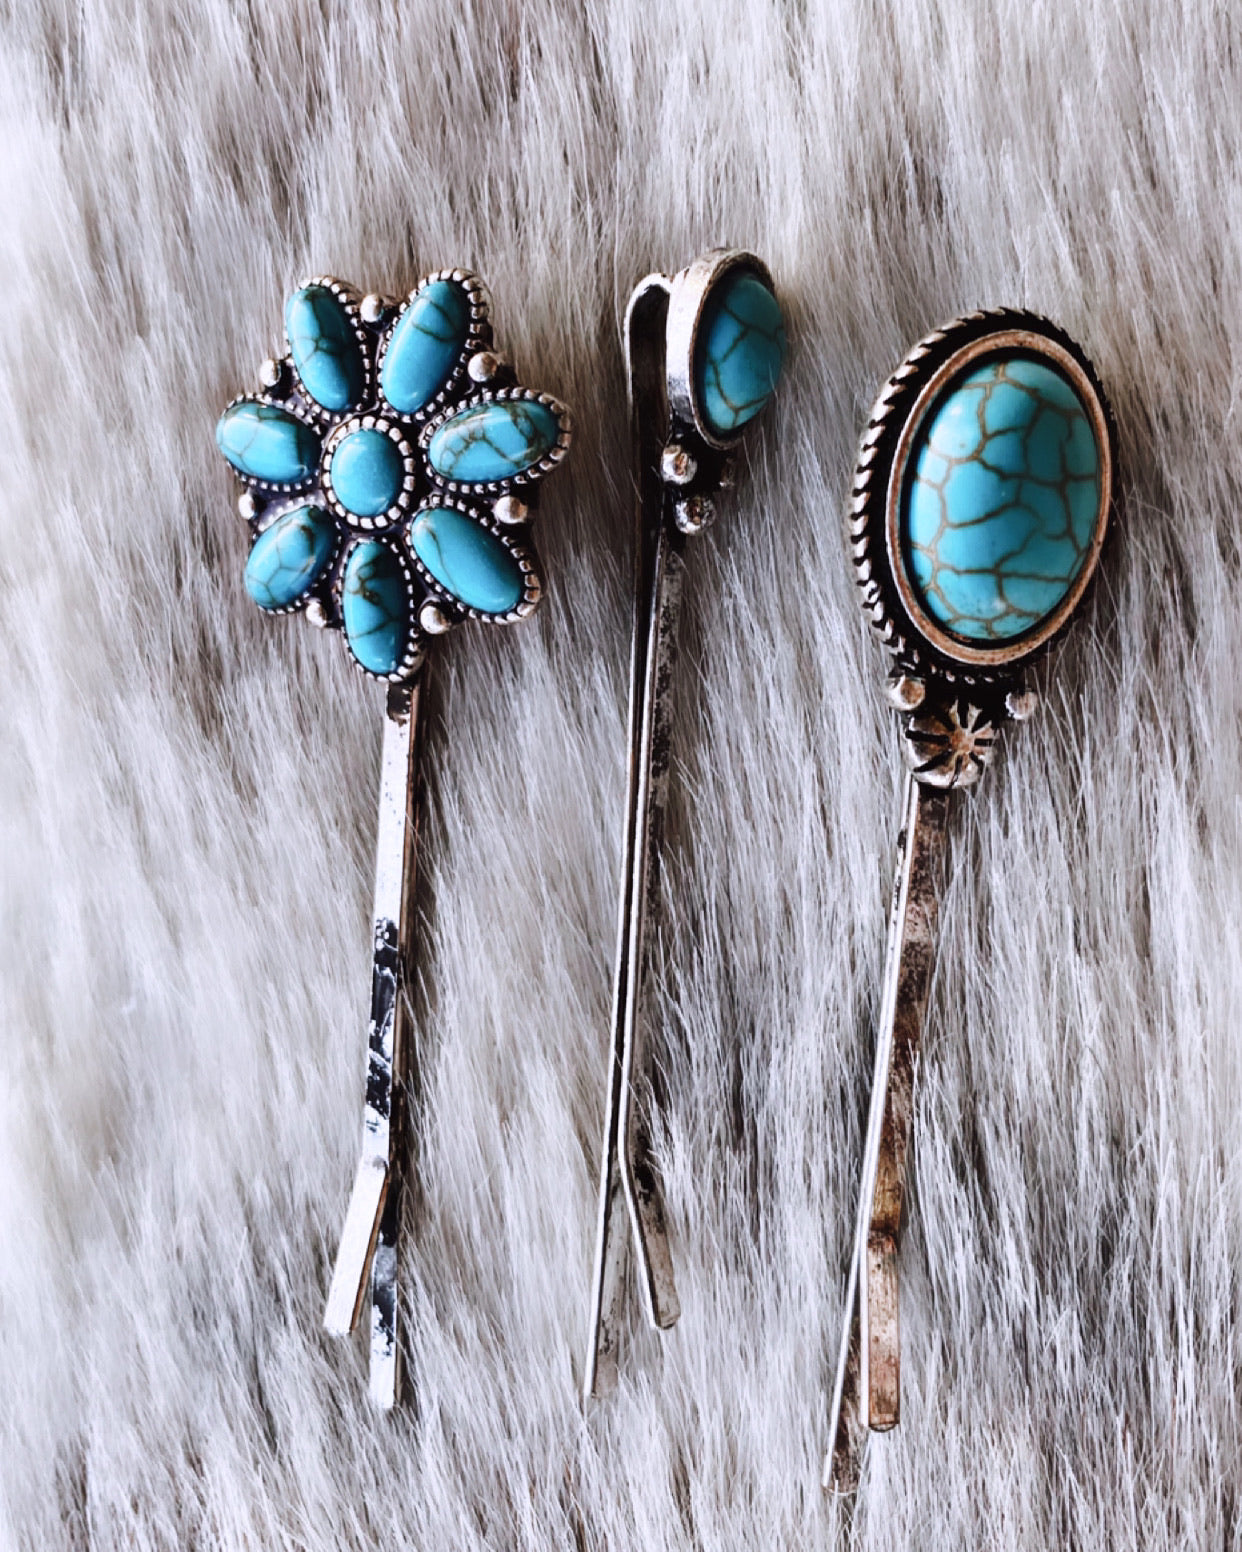 Turquoise hair clips 3 piece set